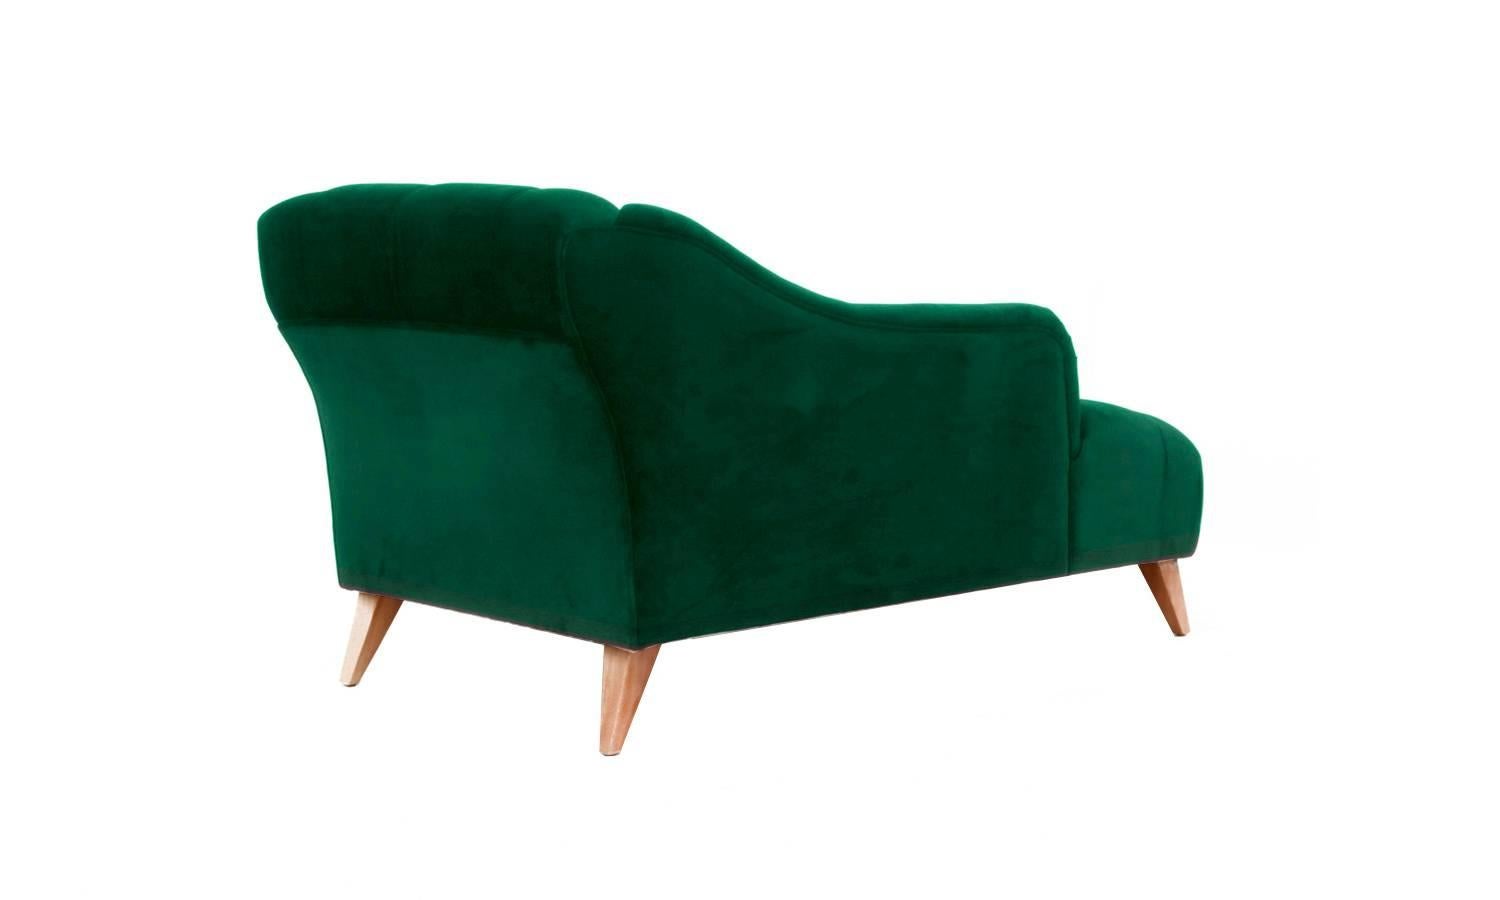 The Abbey chaise longue is a breathtaking piece of modern art deco. It is a contemporary version of a classic Victorian chaise longue, impregnated with old fashioned charm that is sure to impress. The luxurious velvet upholstery is soft to the touch